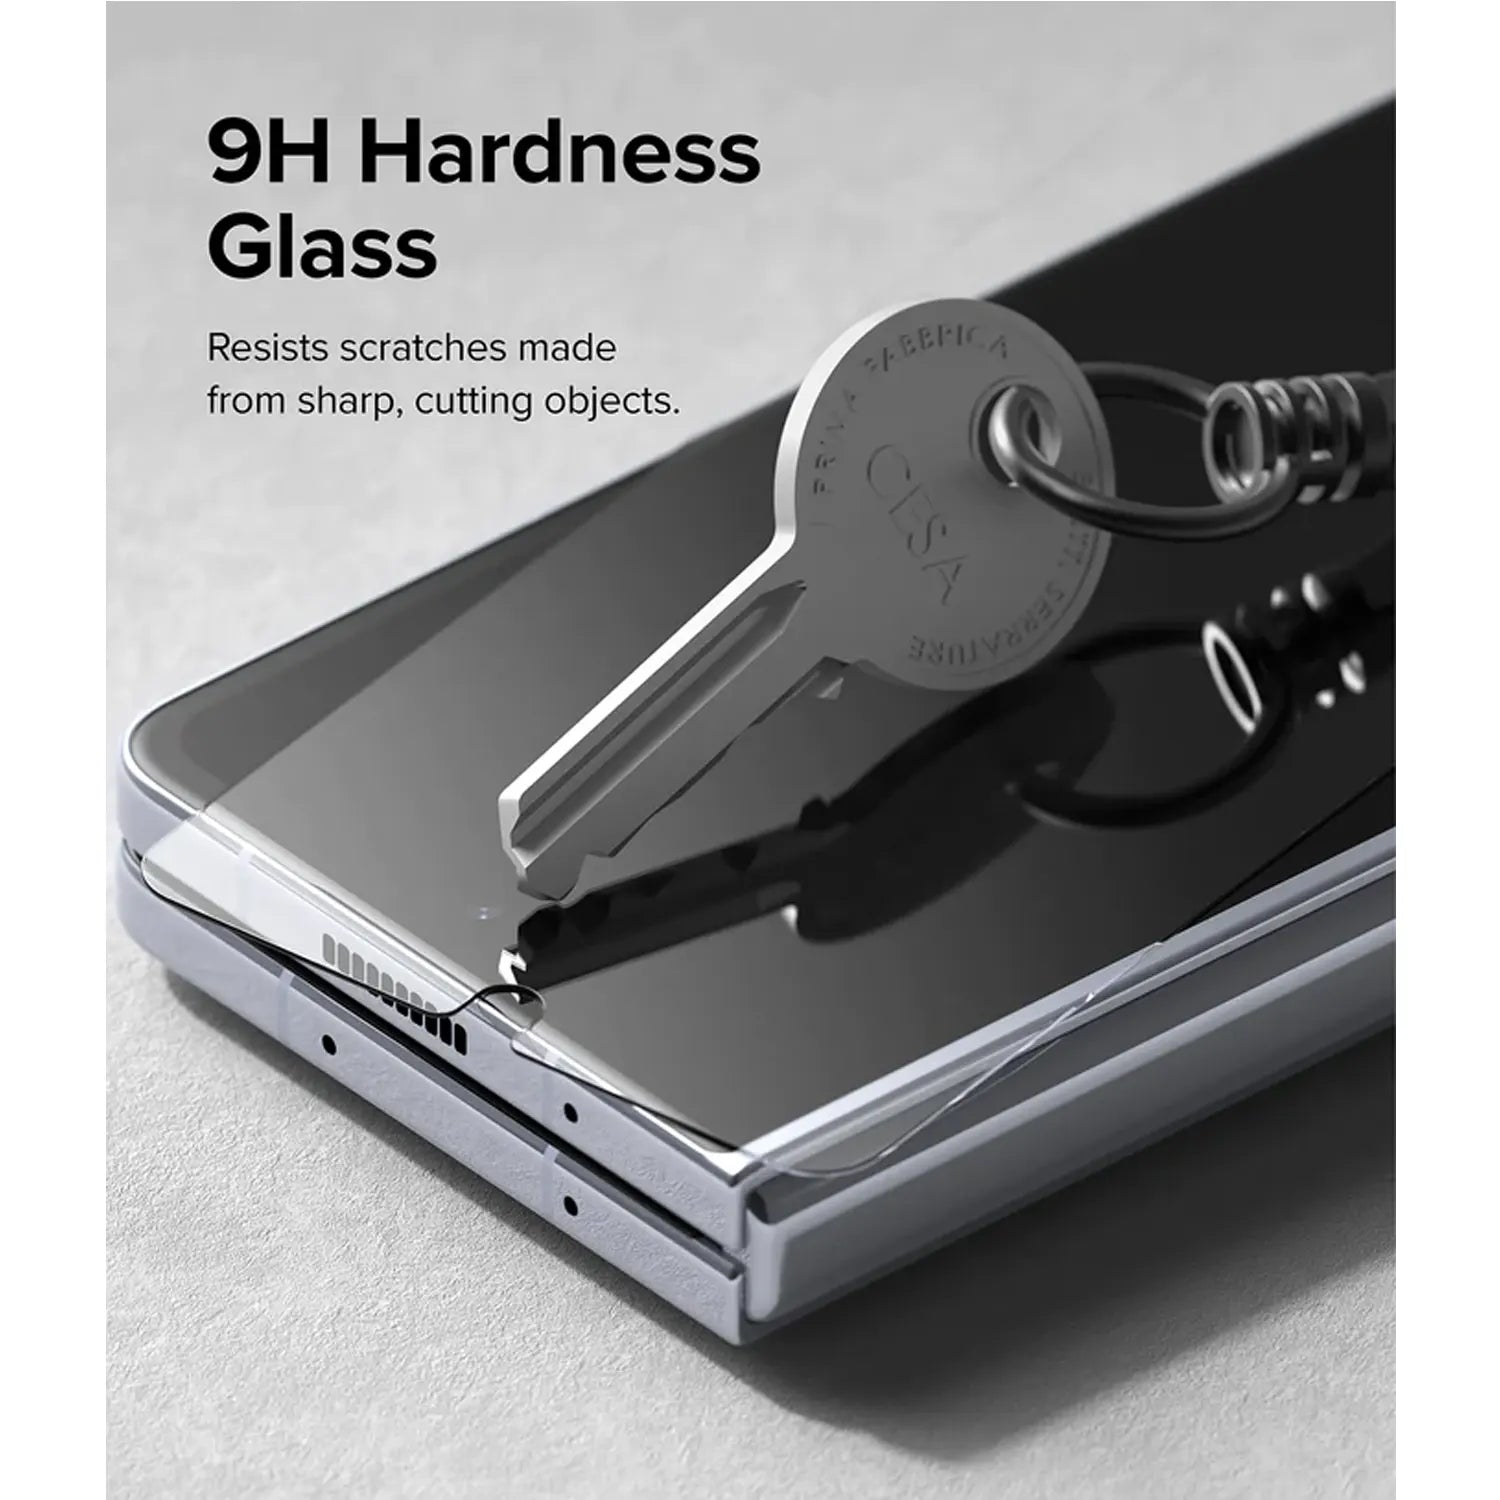 Ringke Cover Display Glass Screen Protector for Samsung Galaxy Z Fold 5 Exterior Cover Display Tempered Glass, Clear